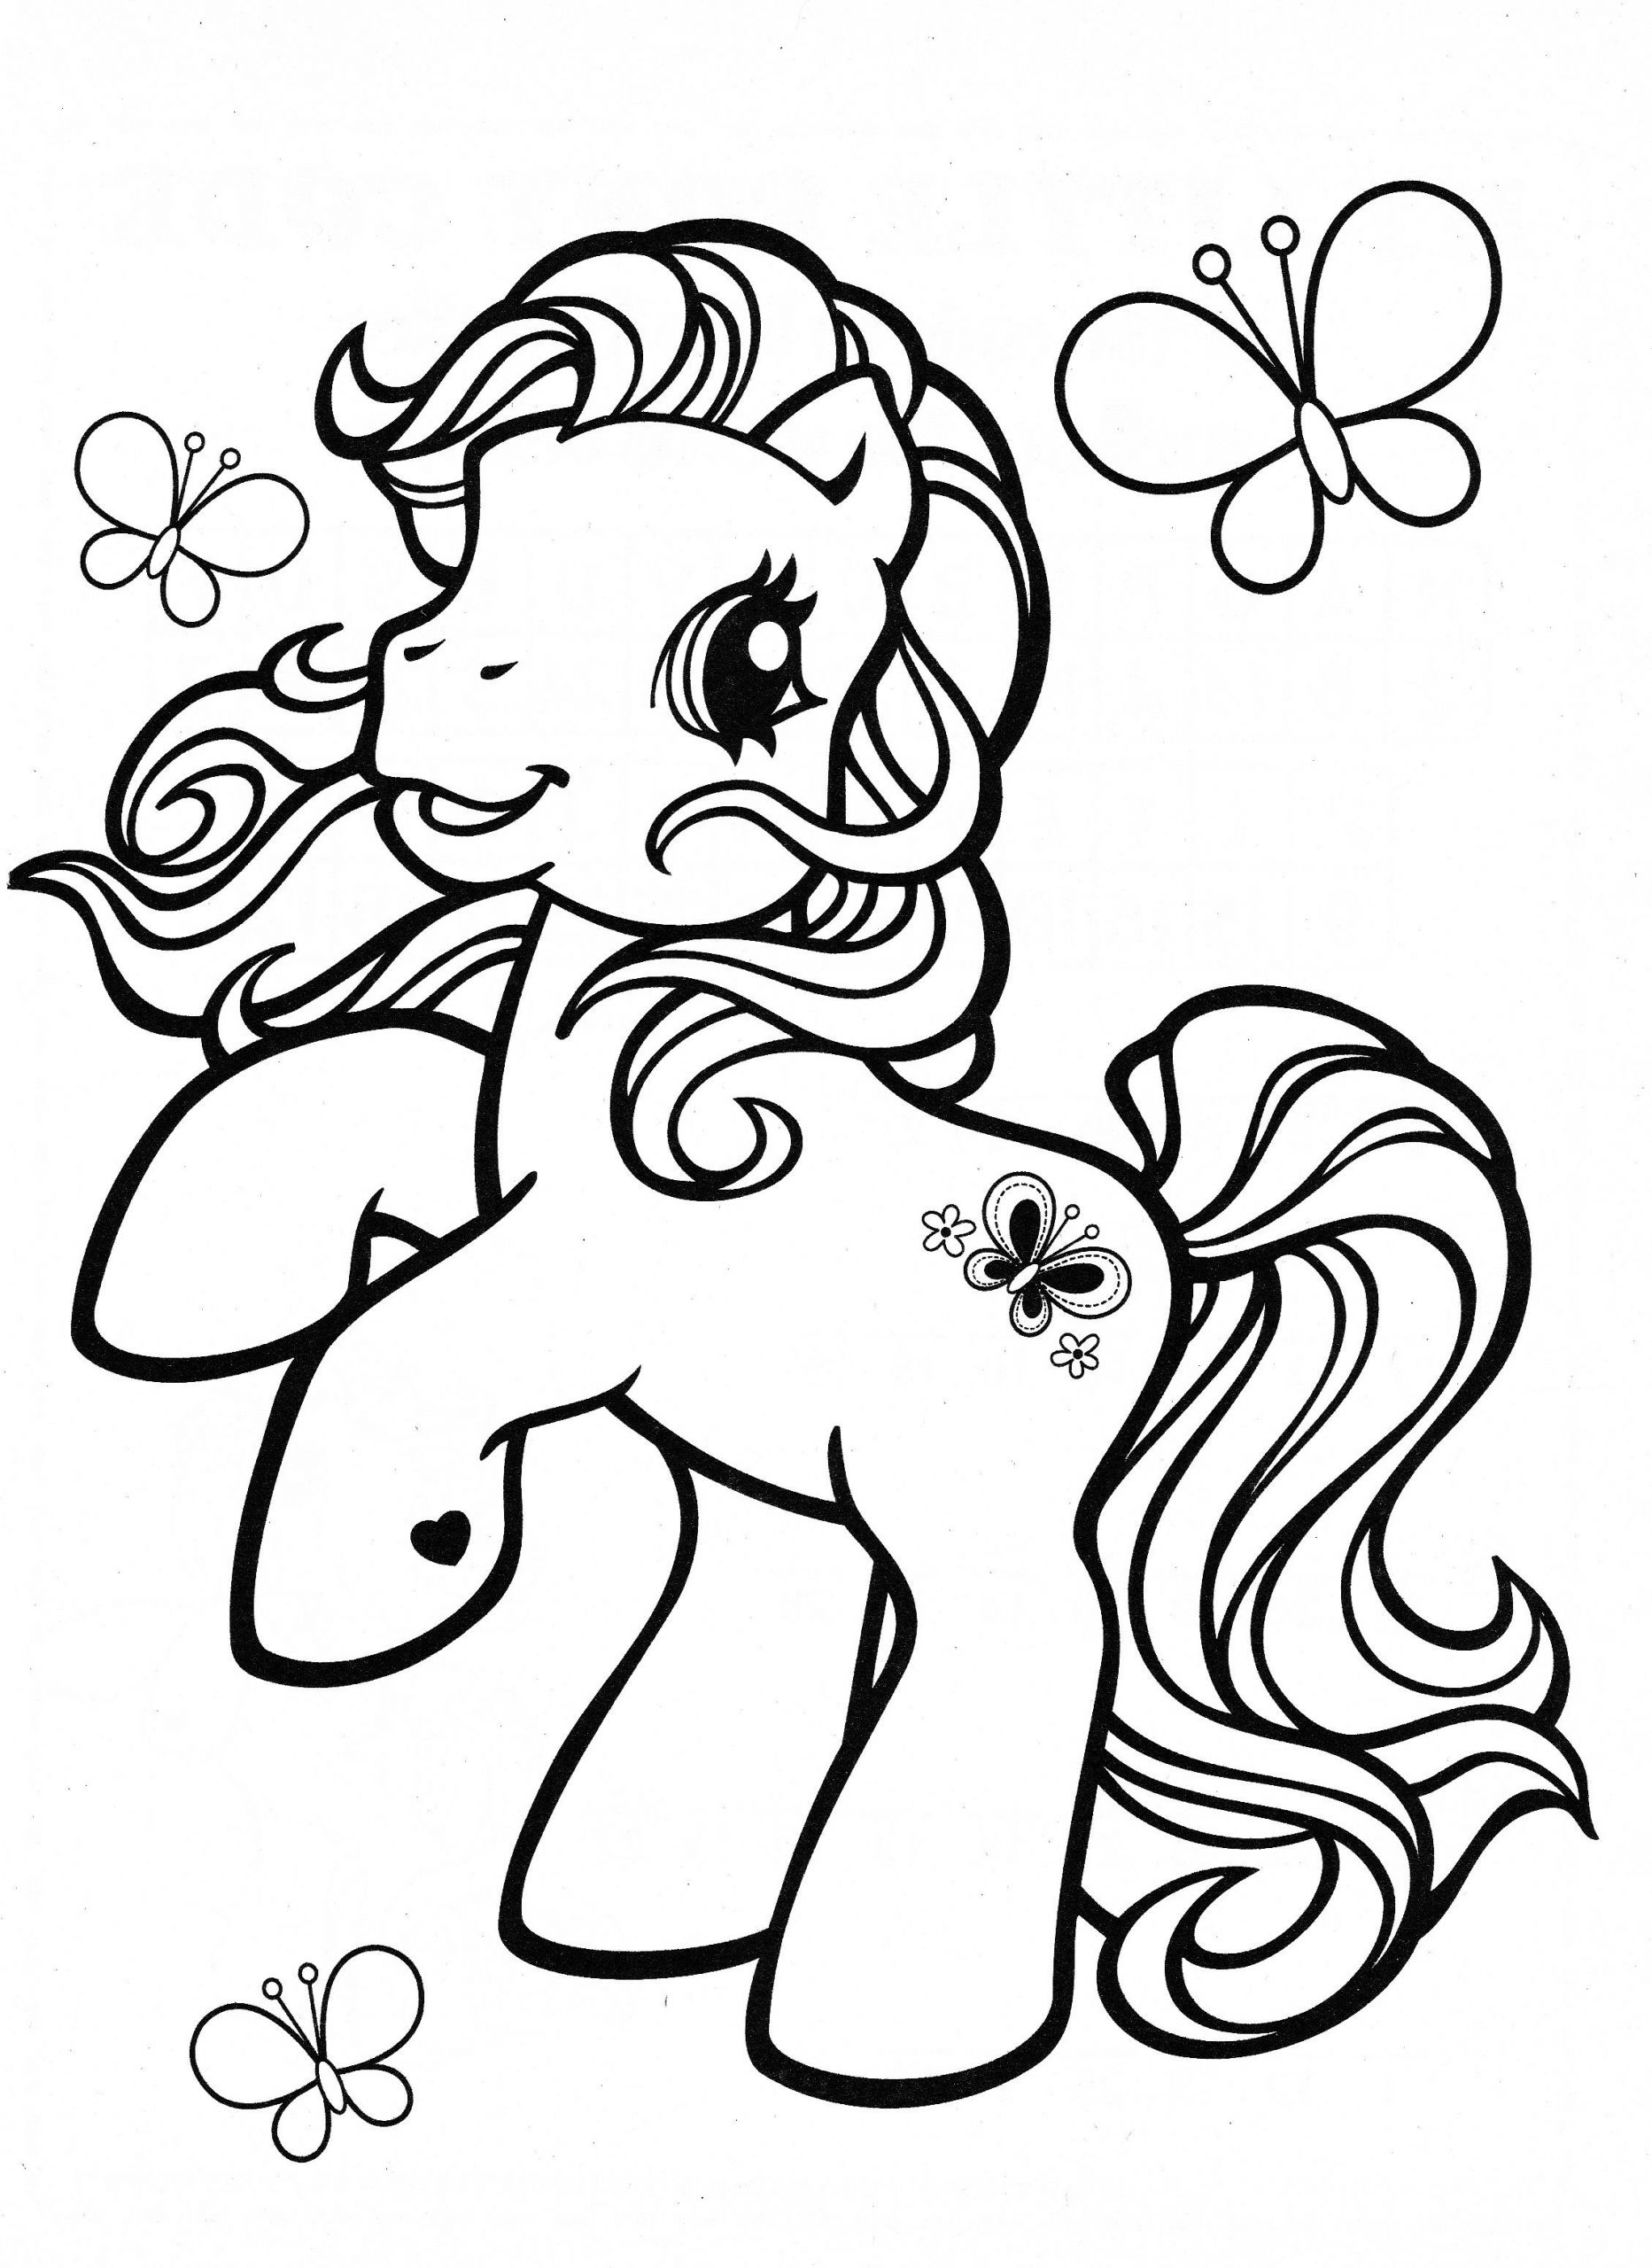 Kids Coloring Pages My Little Pony
 My Little Pony coloring page MLP Scootaloo